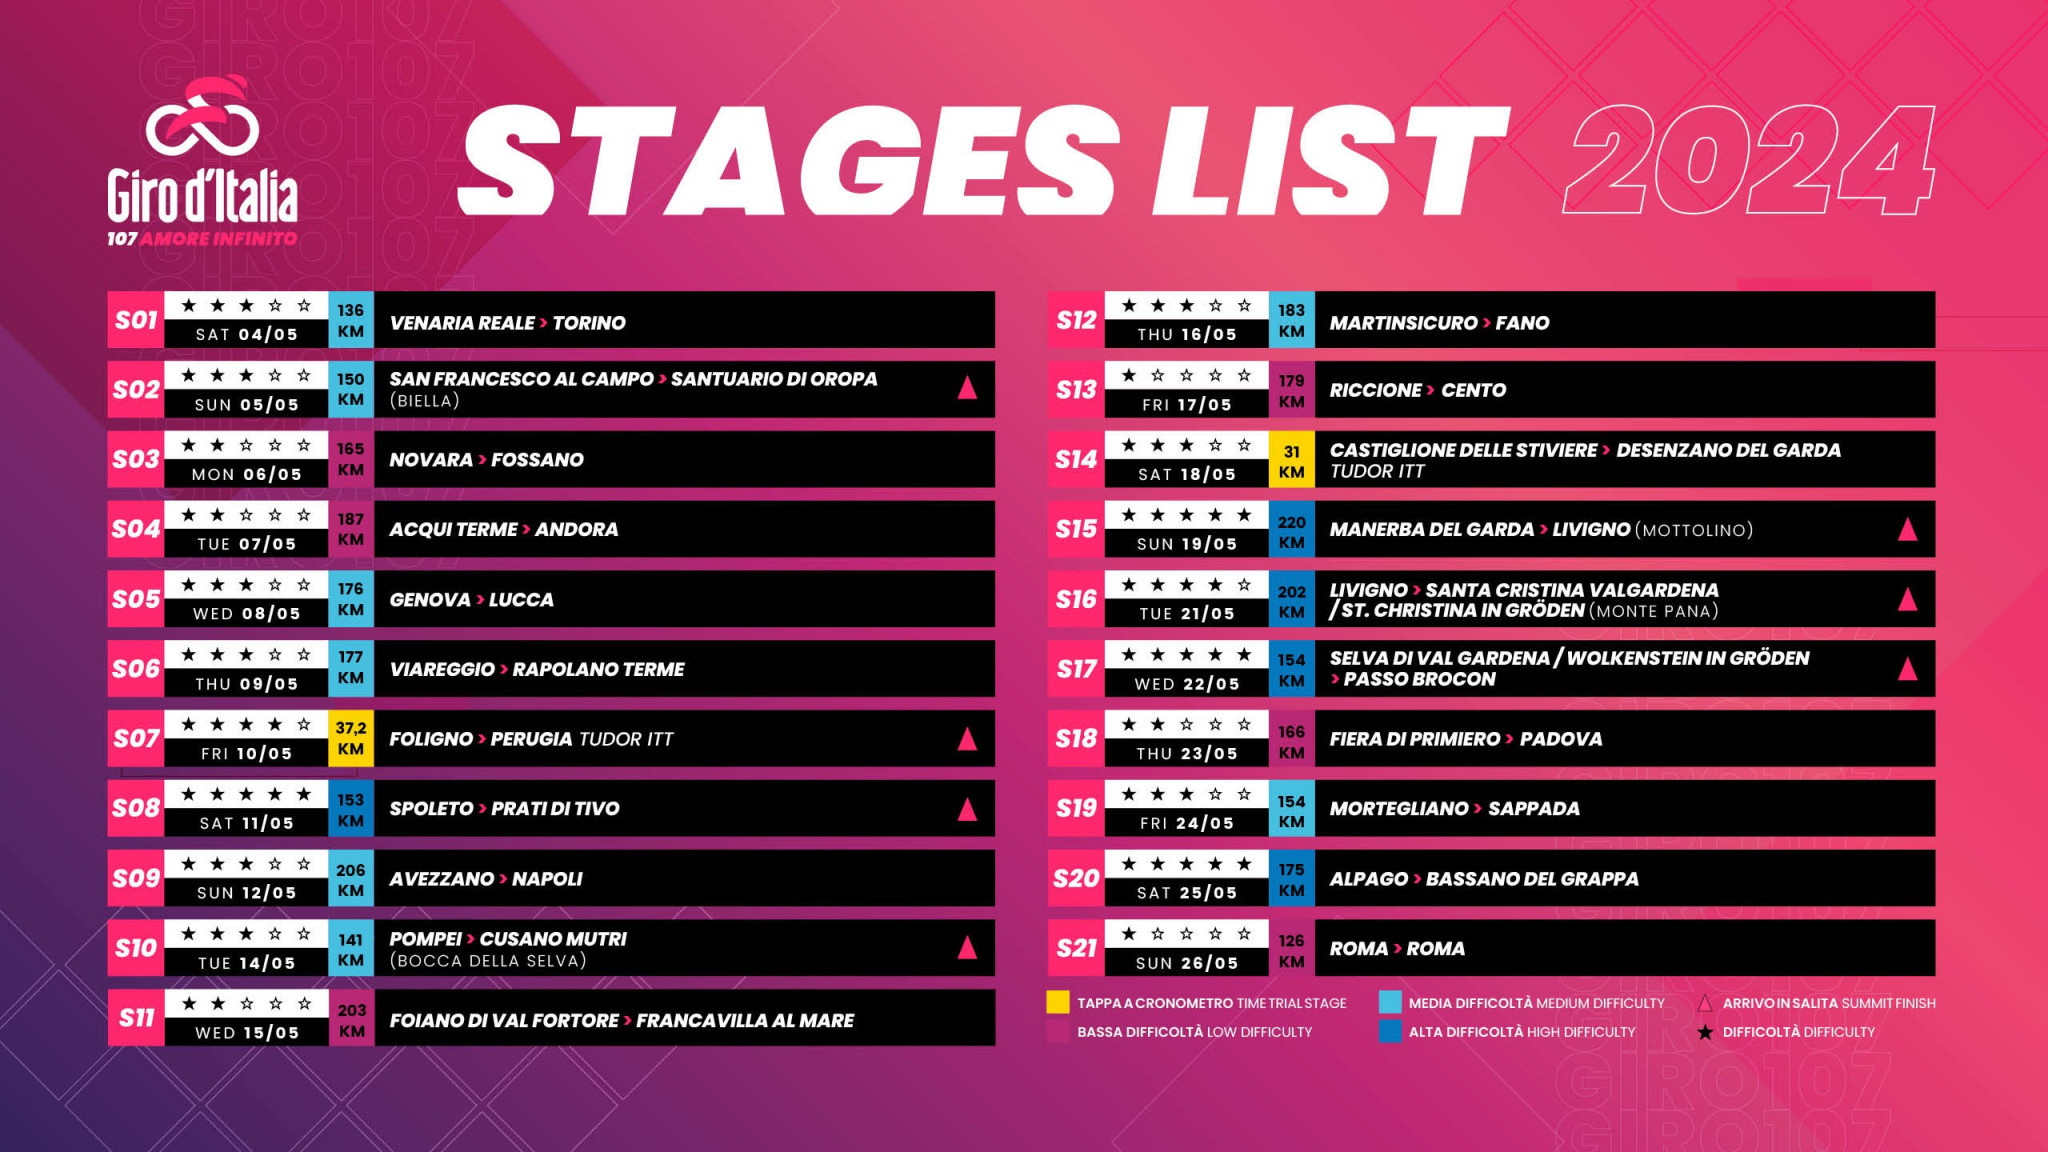 The list of stages for the 2024 Giro d'Italia, which is set to be the 103rd edition of the Grand Tour stage race ©La Presse